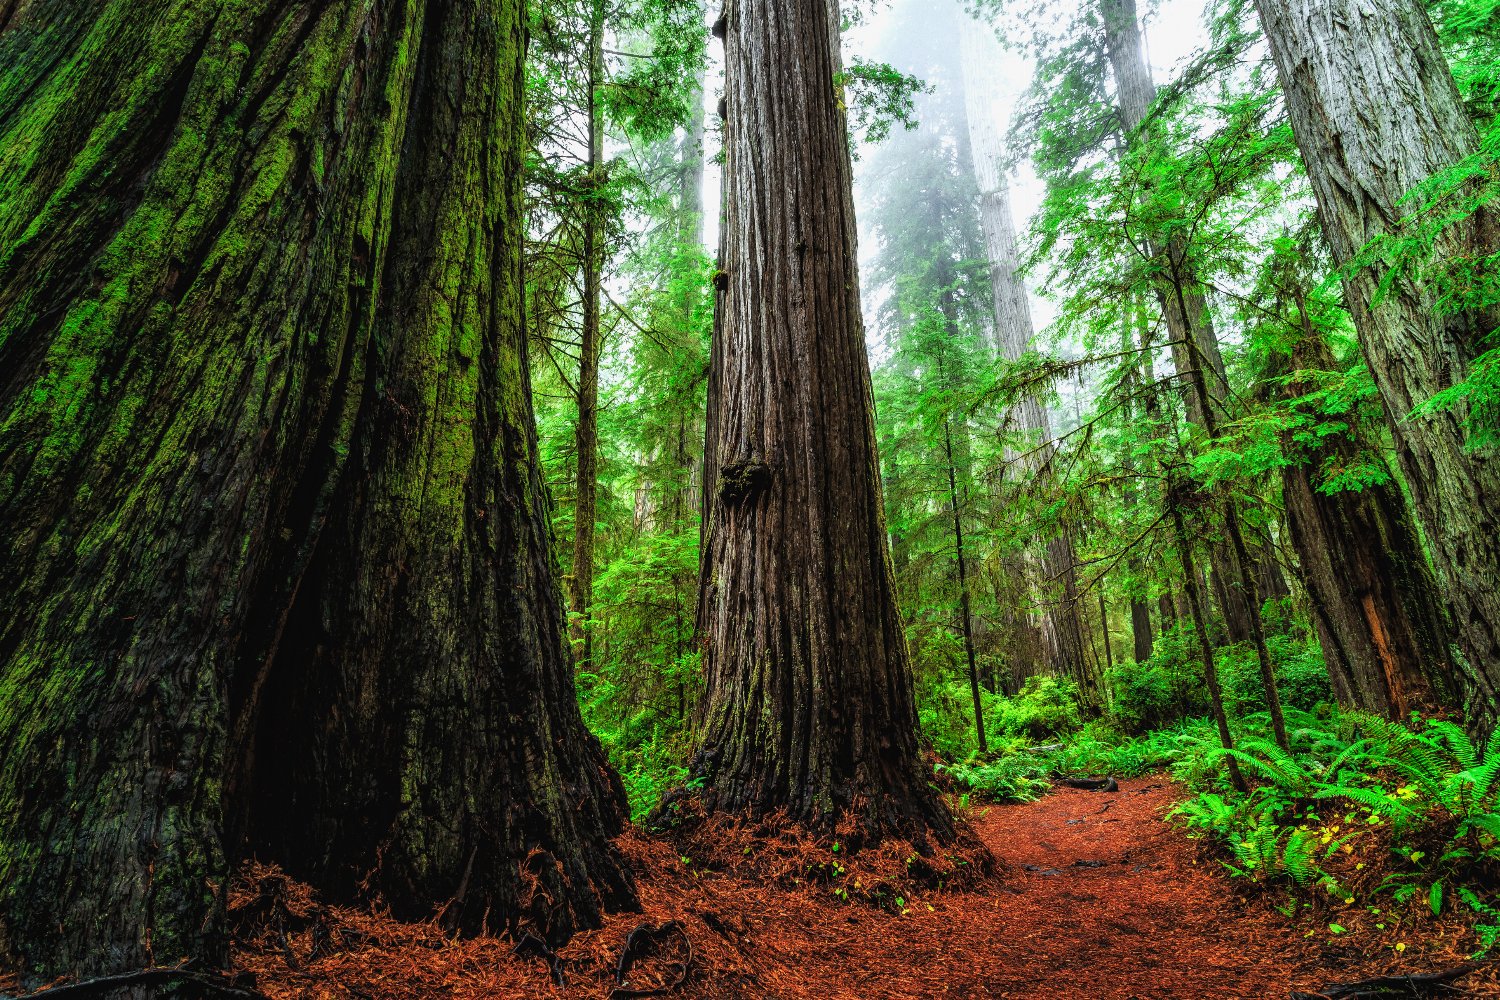 Coast redwoods in Stout Grove